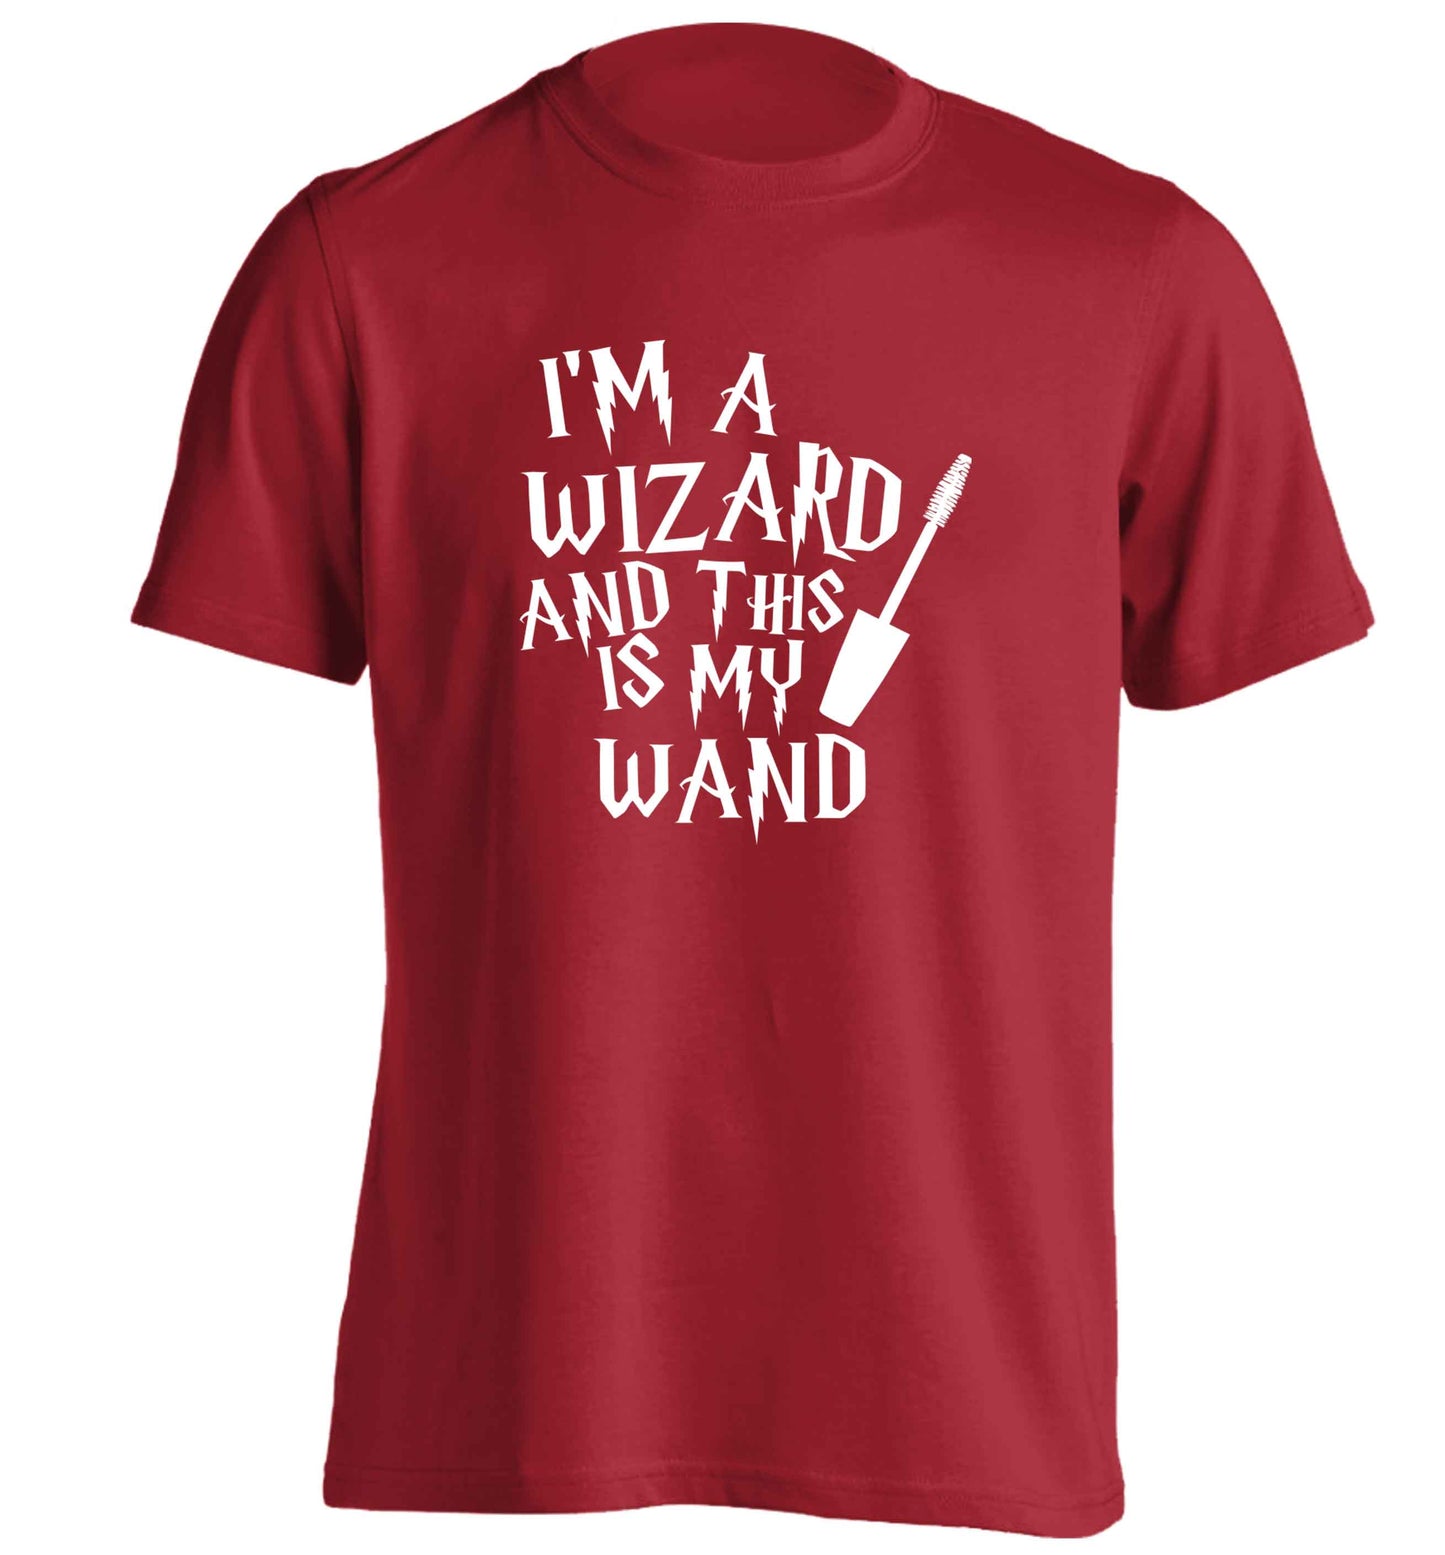 I'm a wizard and this is my wand adults unisex red Tshirt 2XL